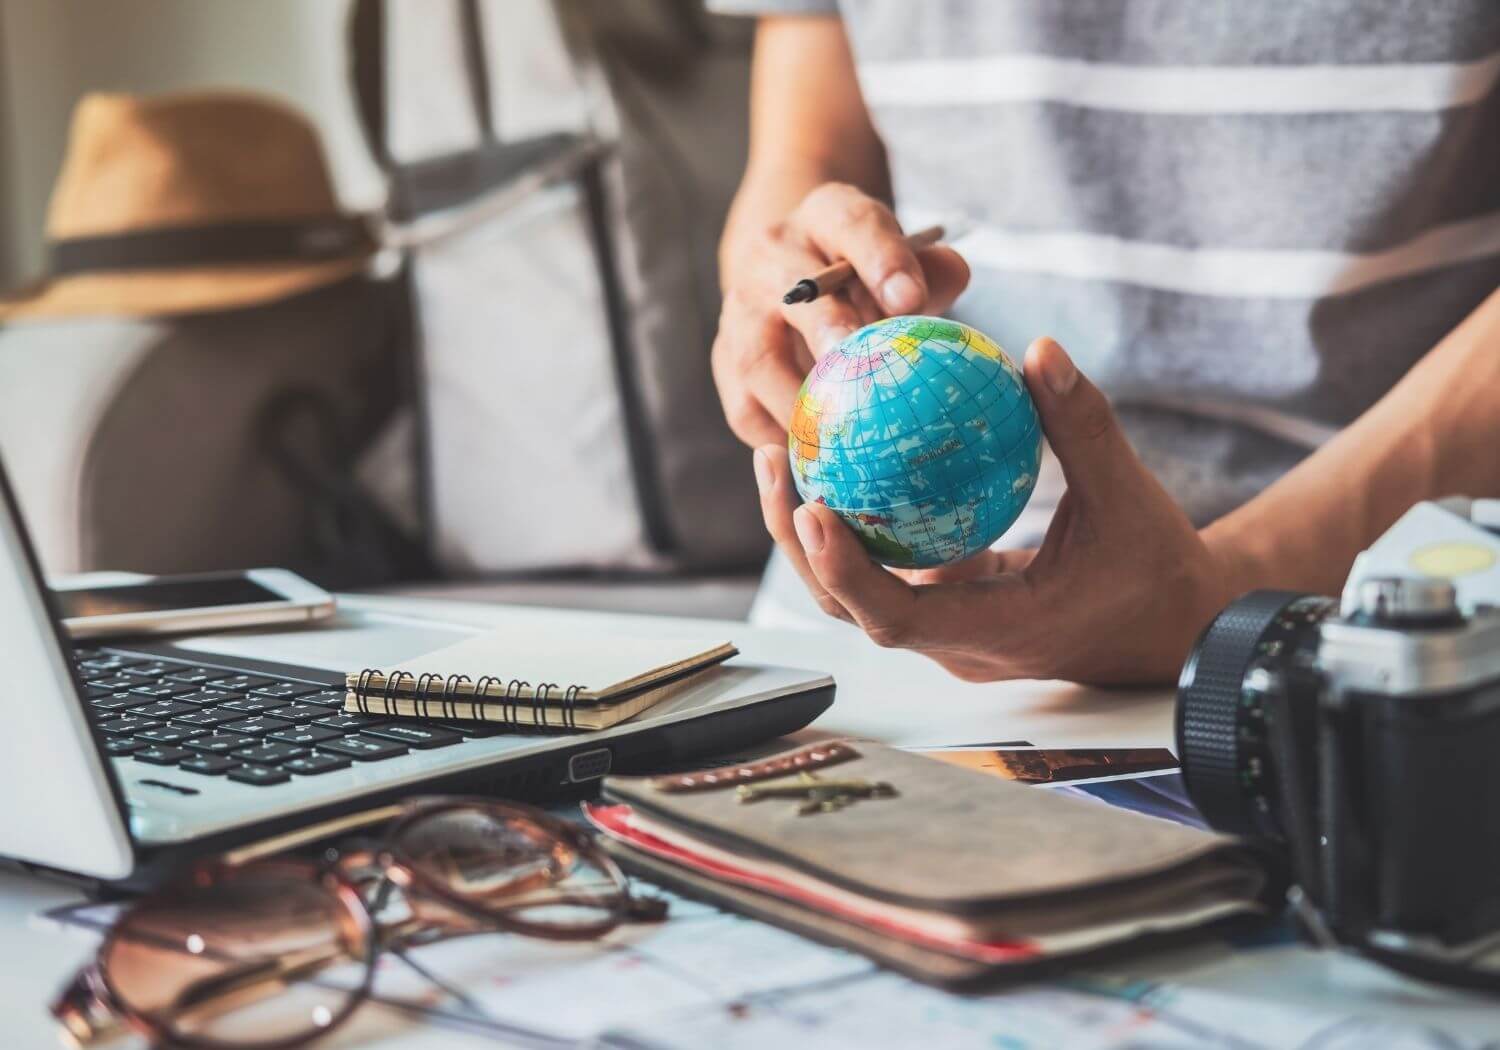 At the office, a man is holding a small globe and on his right hand is a pen with a laptop and other things on the table